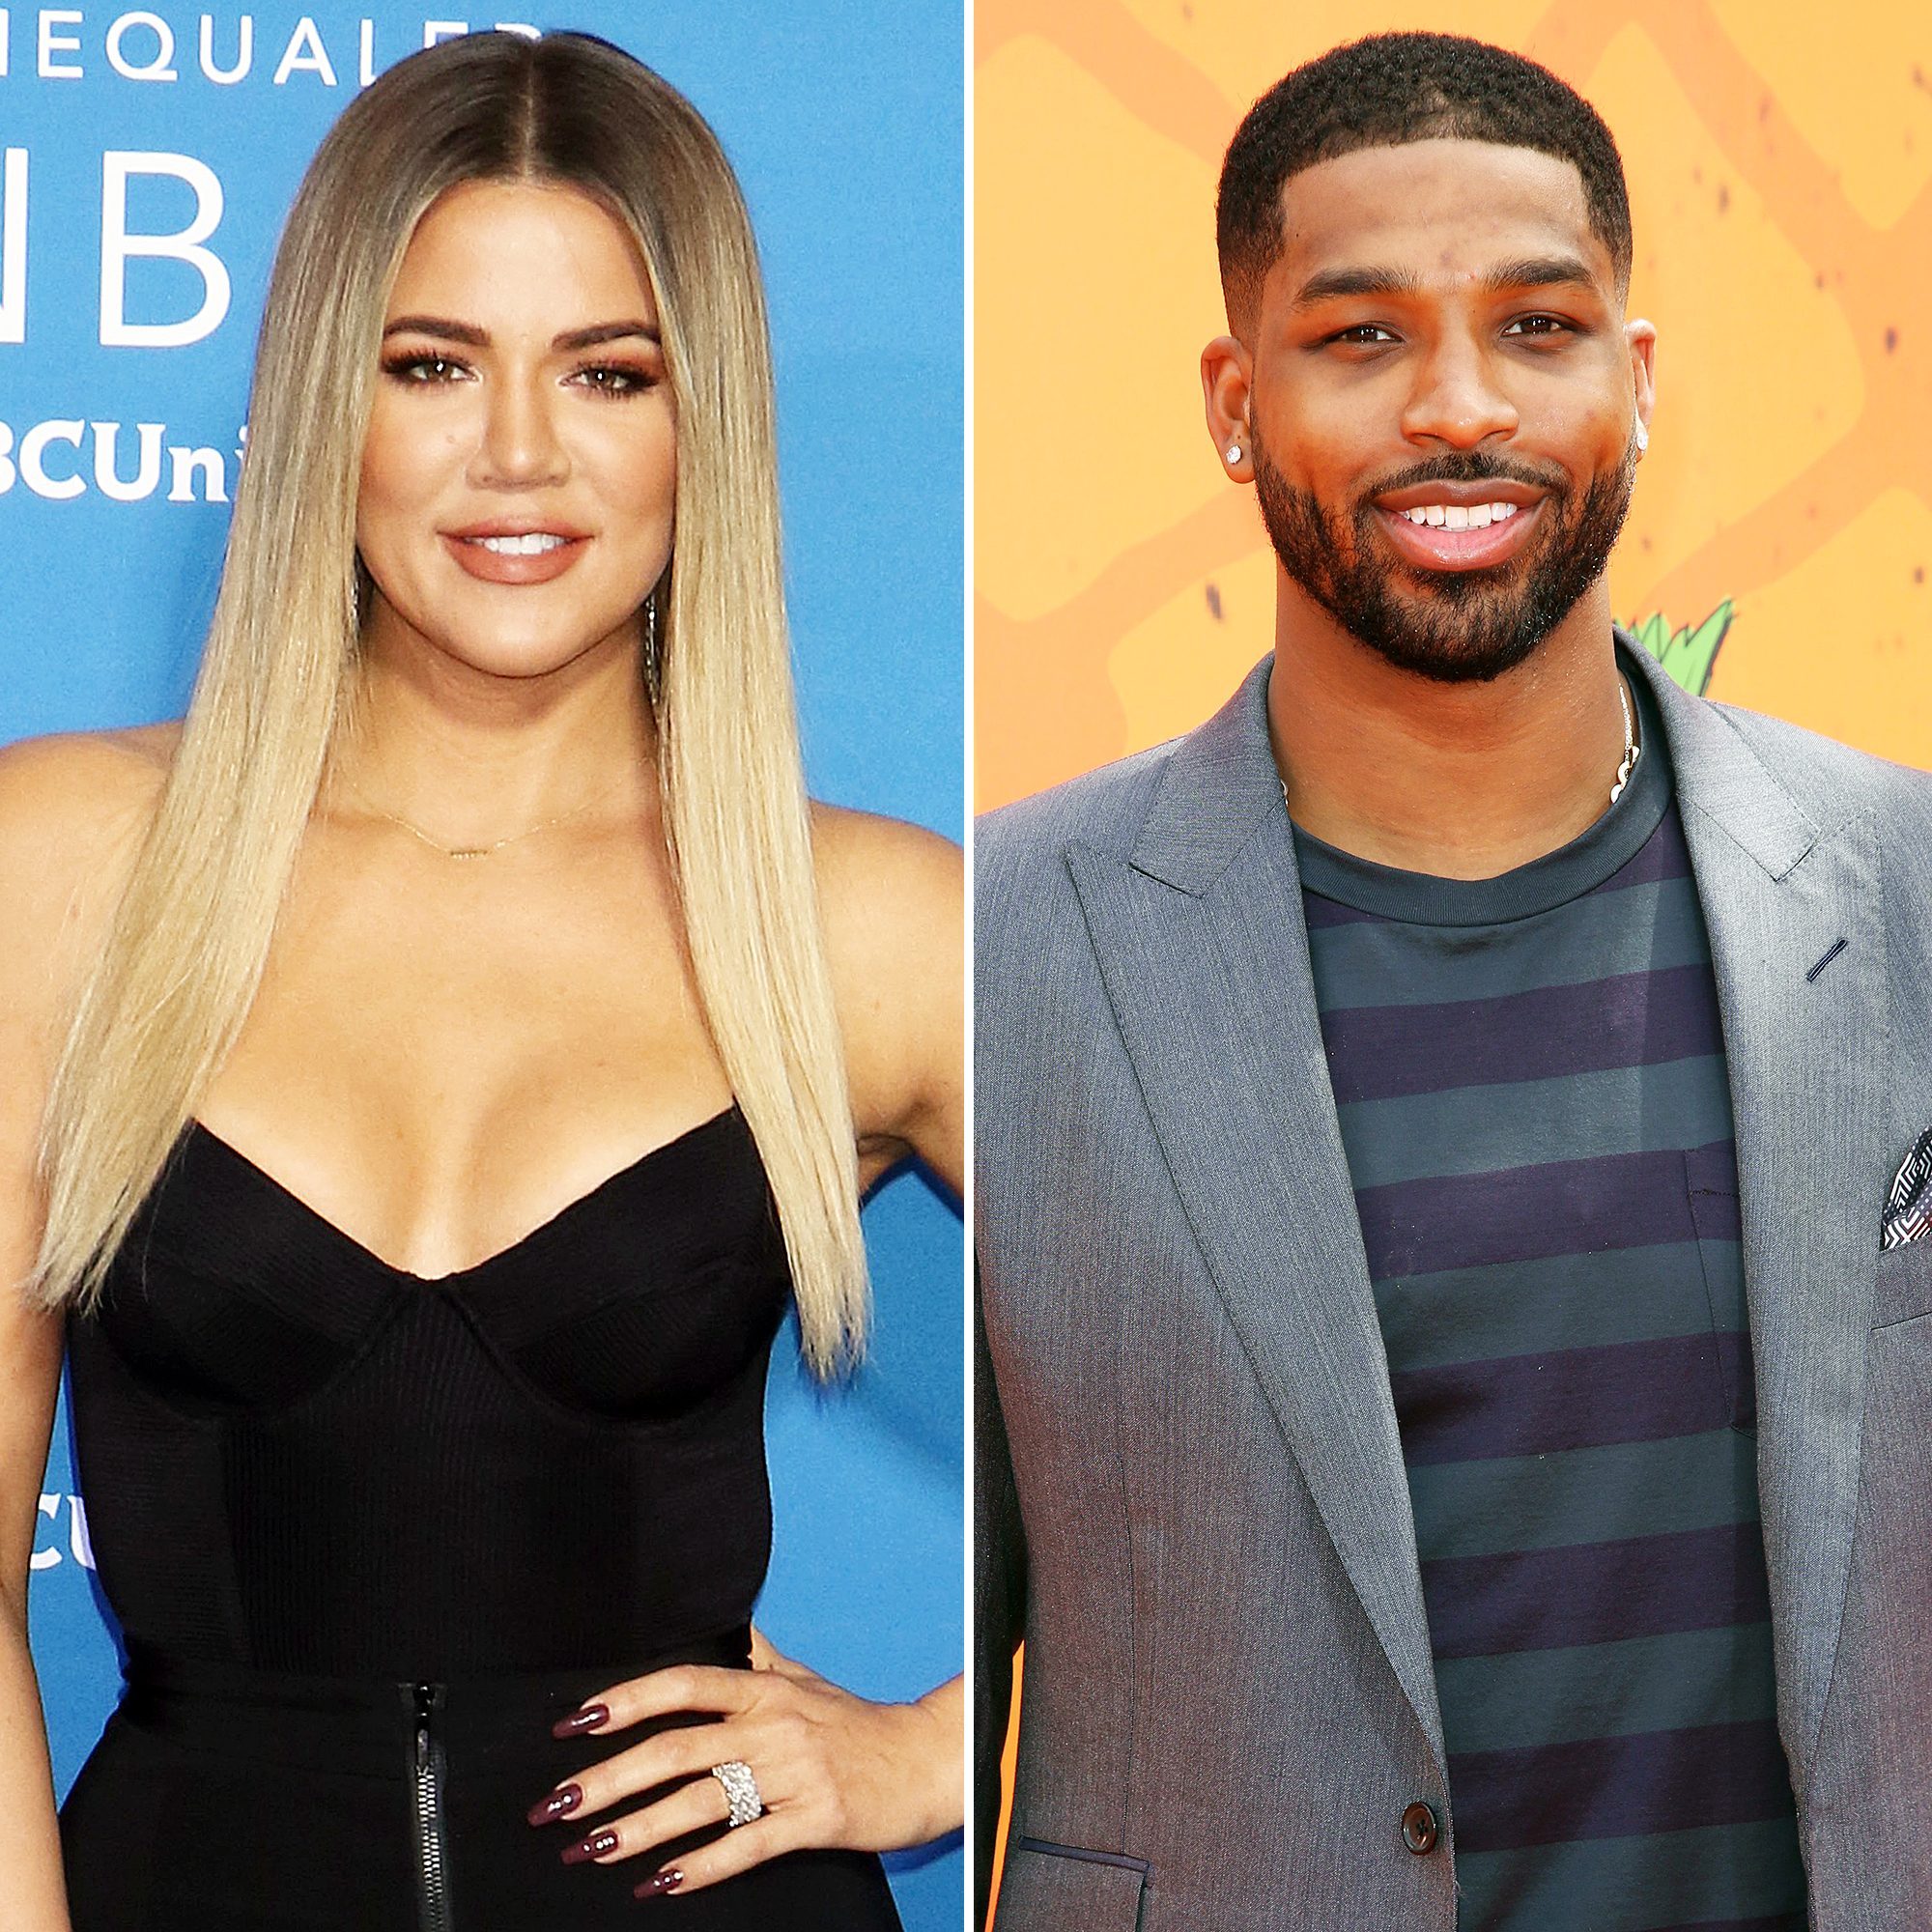 Khloe Kardashian Flashes Huge Ring on Date with Tristan Thompson